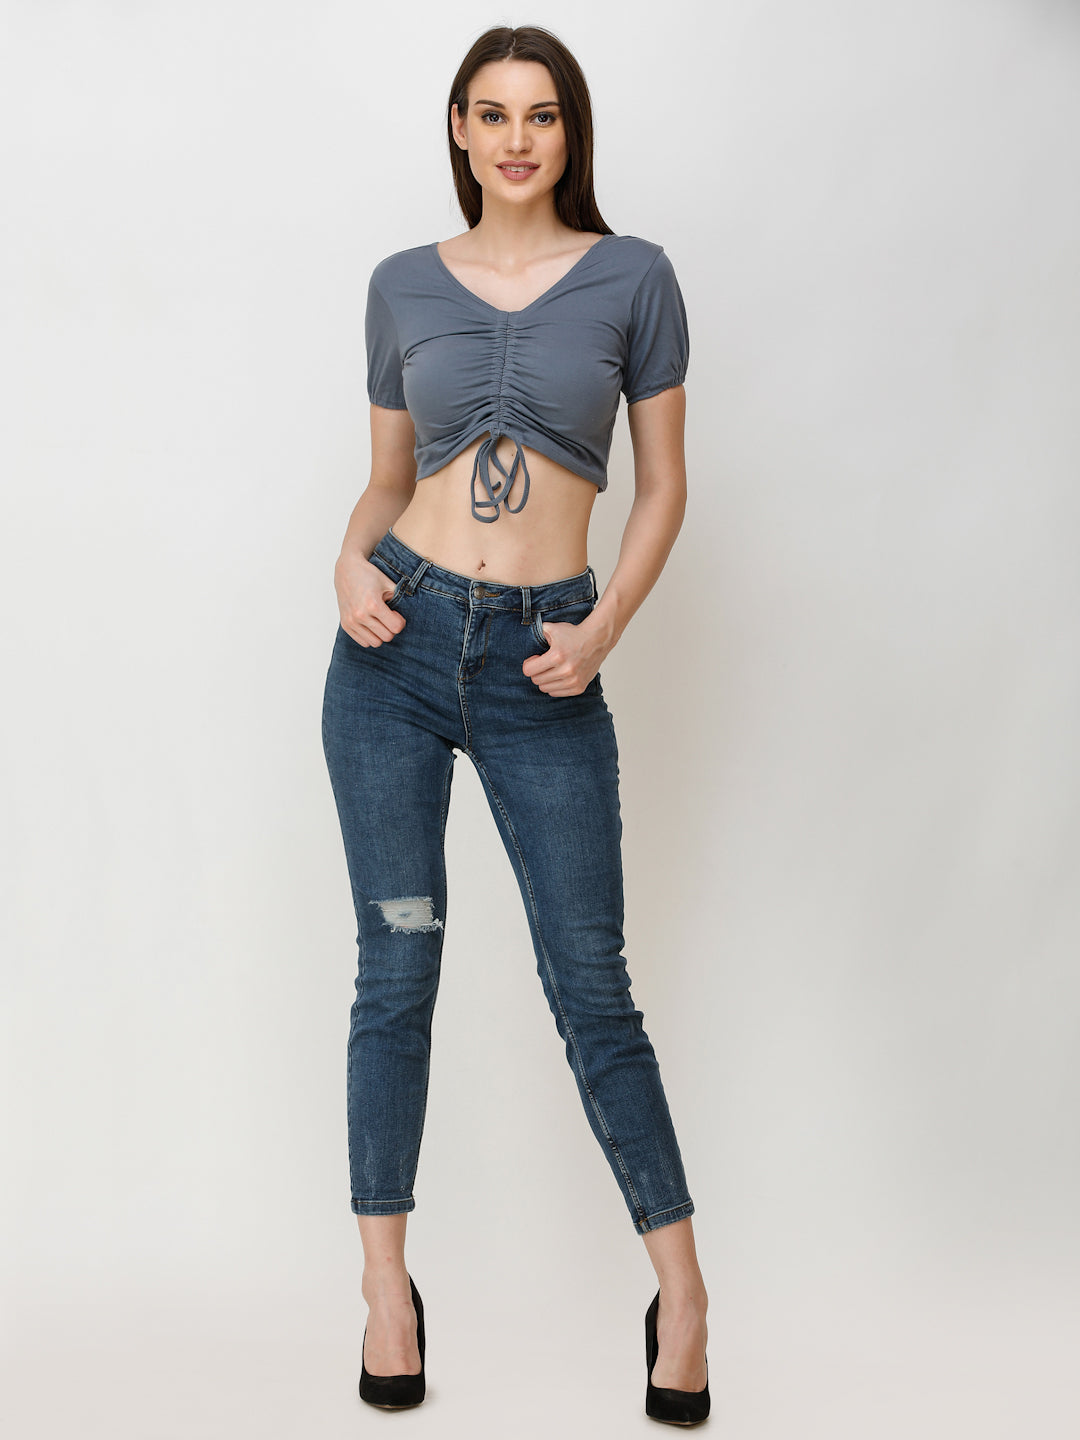 SCORPIUS Women Grey Solid Fitted Crop Top